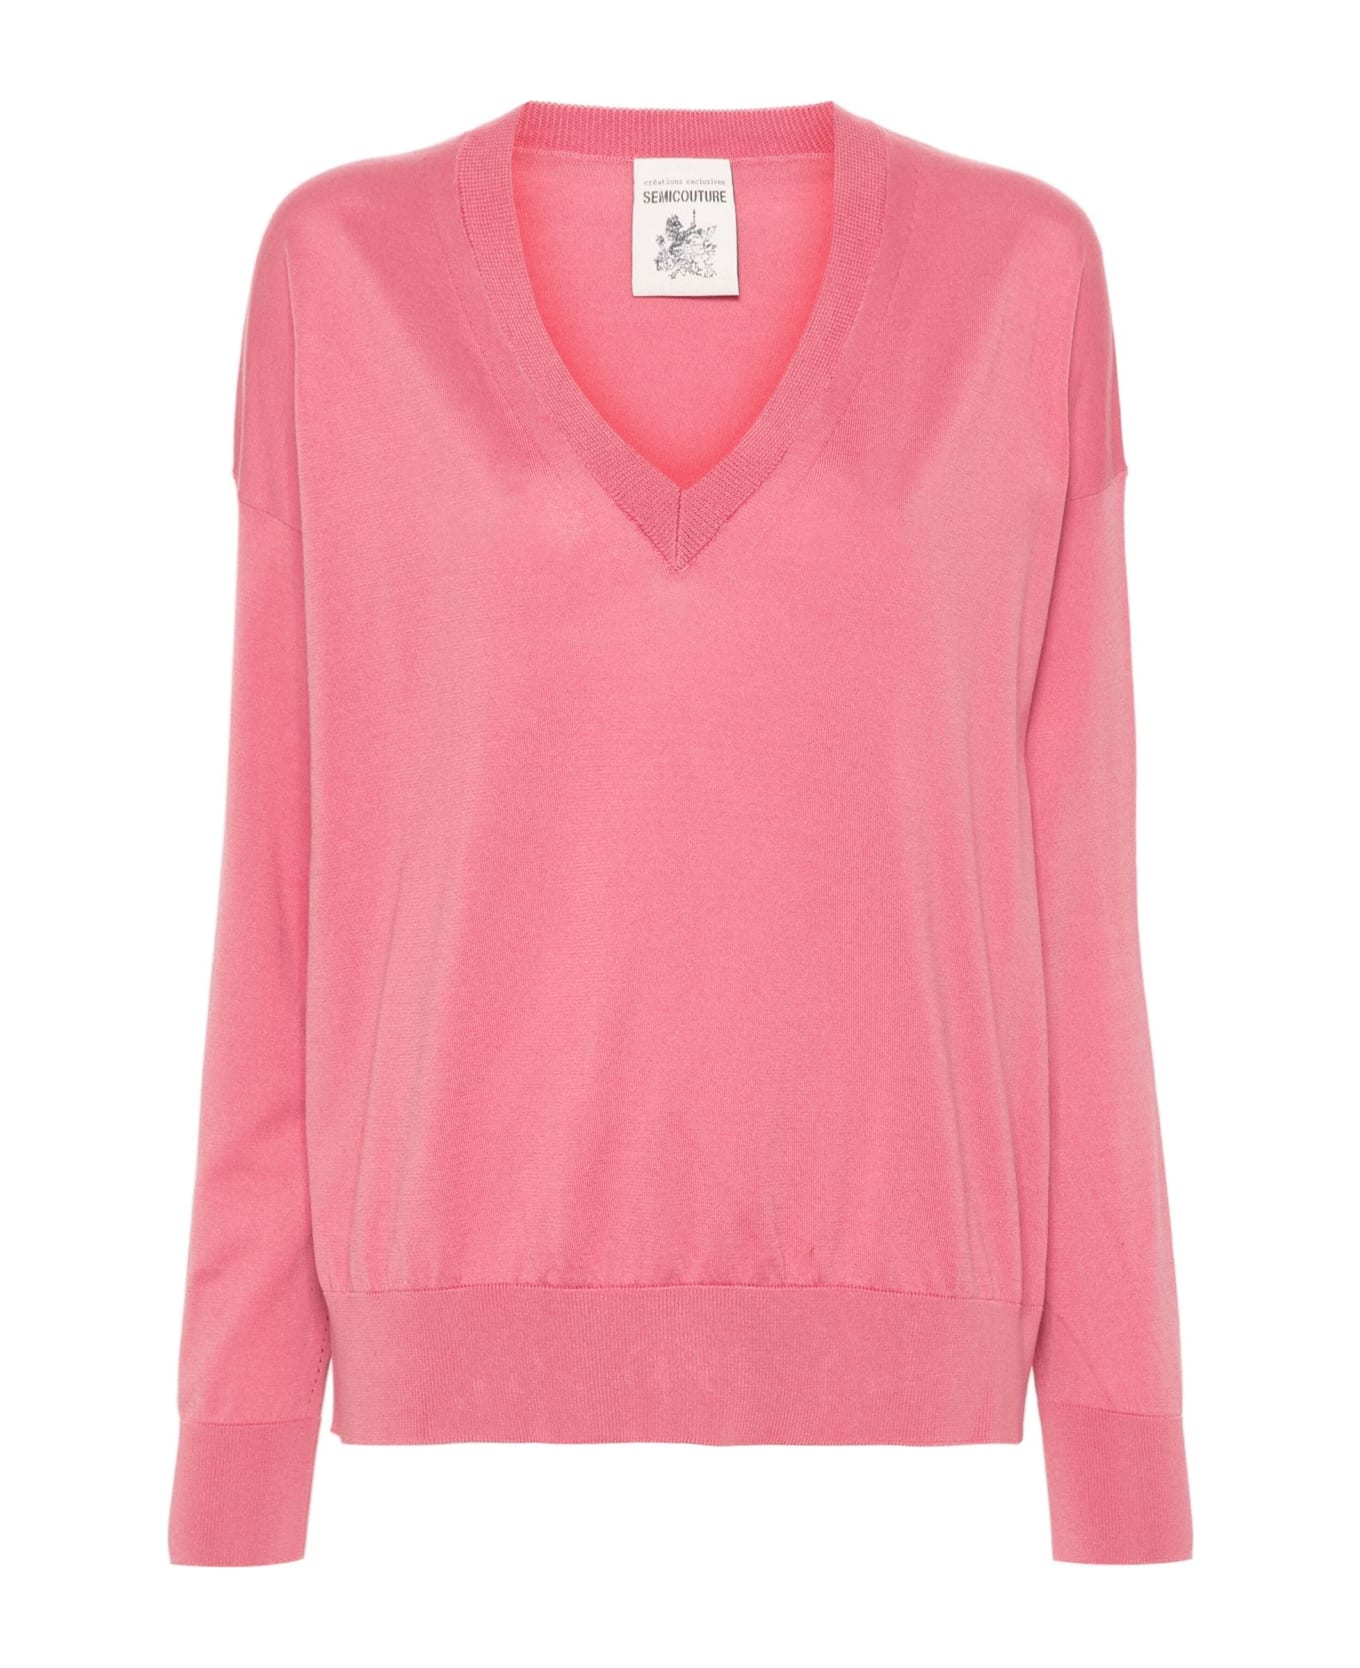 SEMICOUTURE Pink Cotton Sweater - Pink